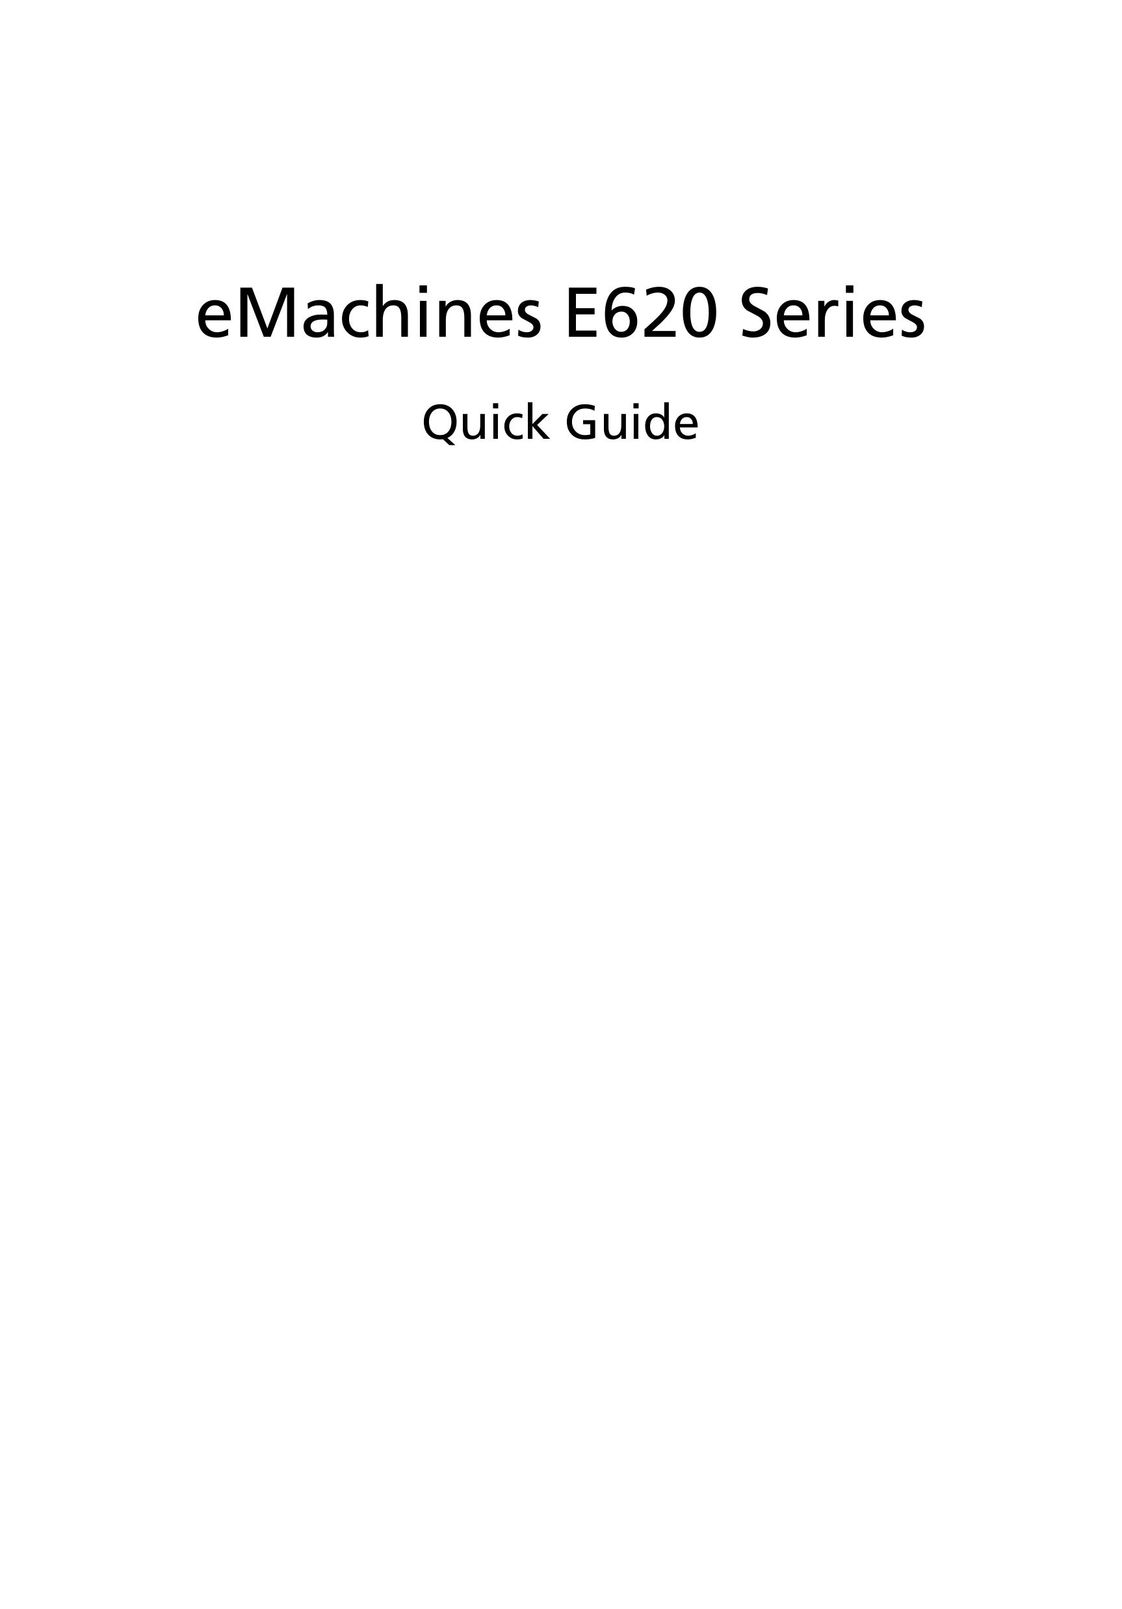 eMachines E620 Series Laptop User Manual